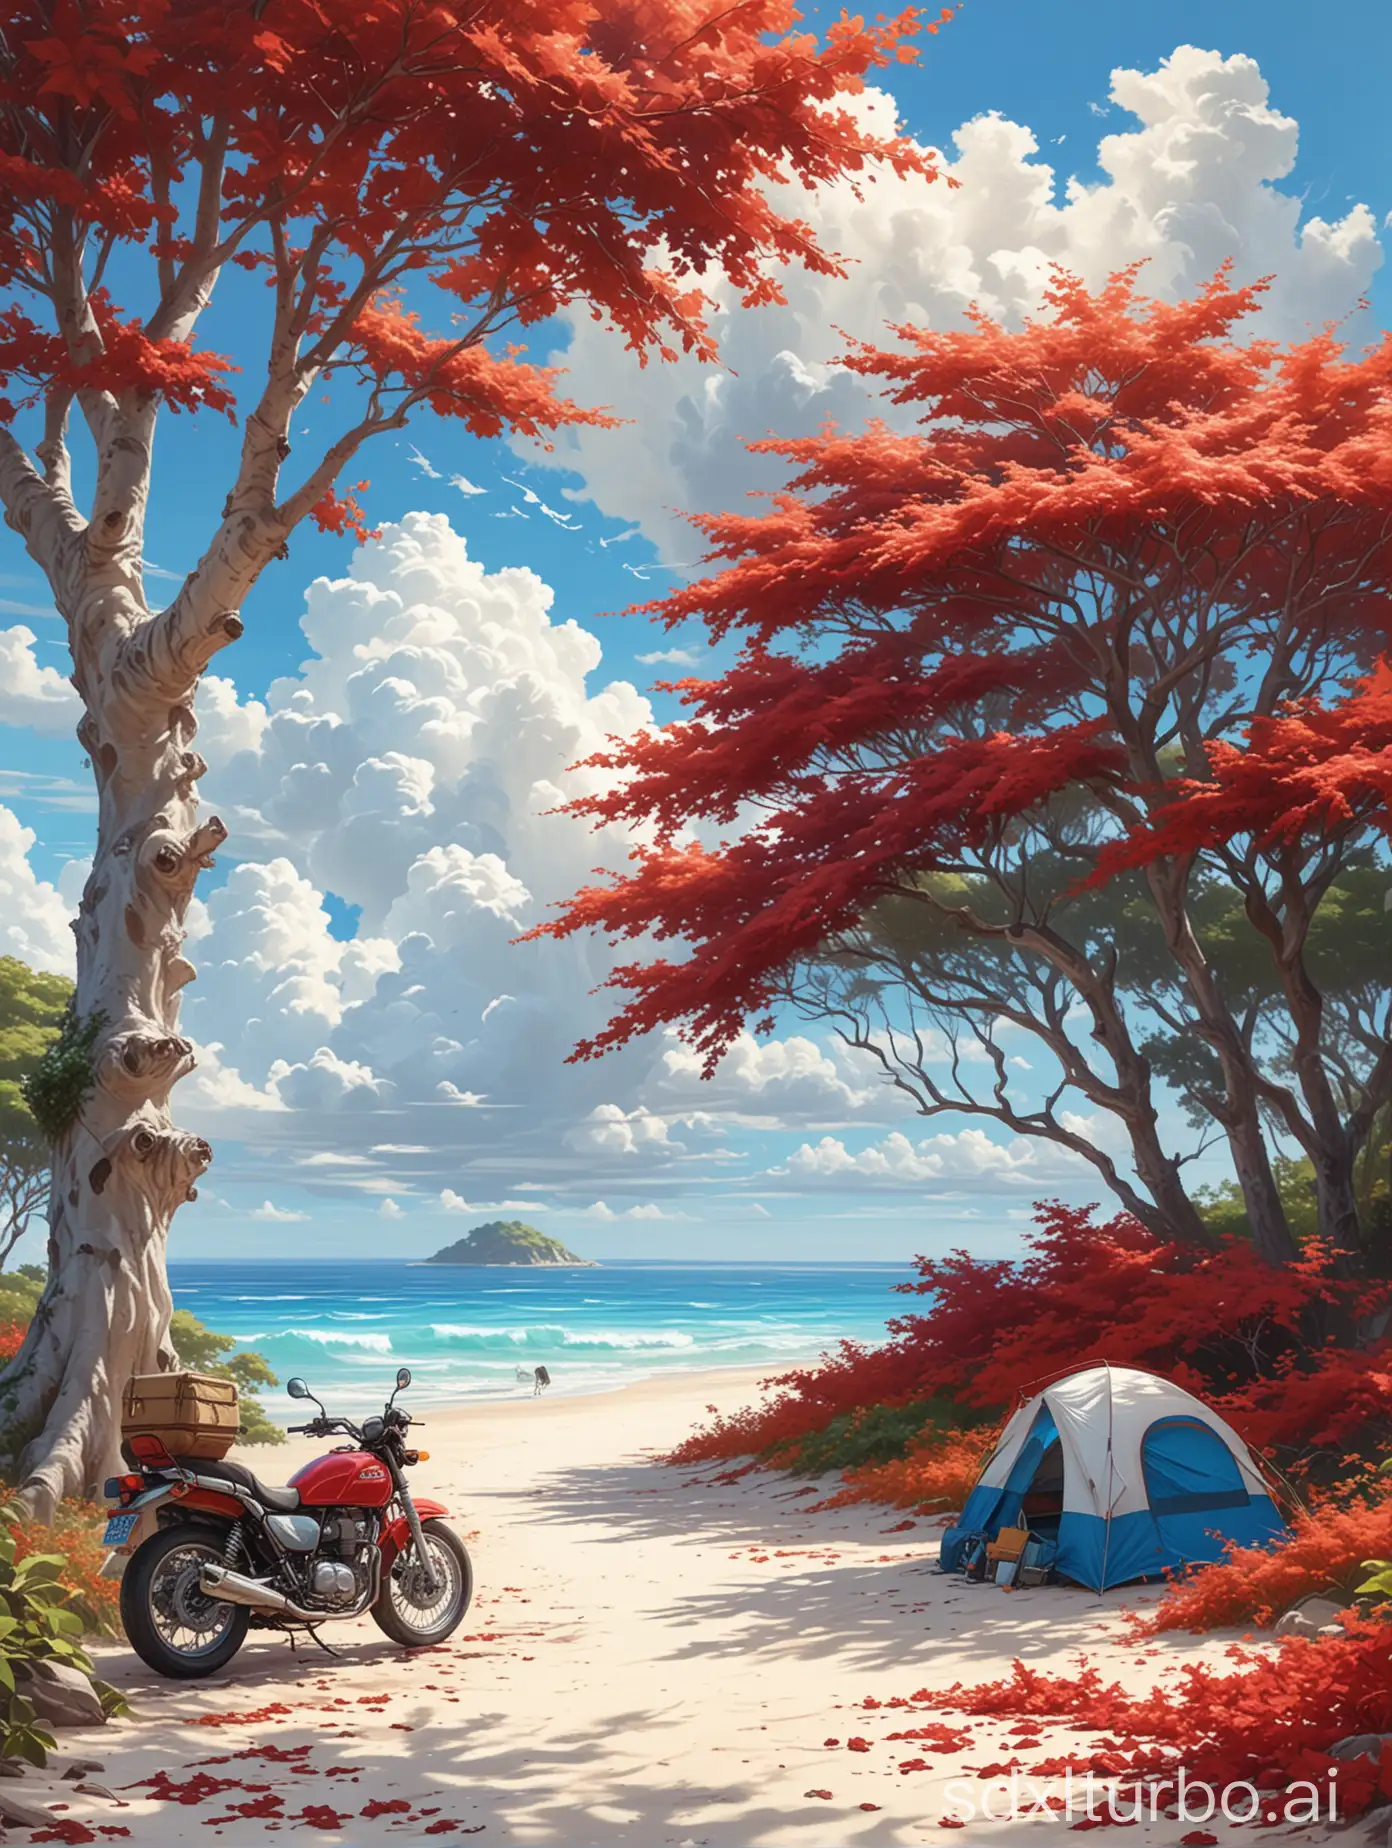 A digital painting style,a vivid bright fluffy cloudy white clouds,below is partially seen ocean and white sand shore and a huge tree with a red leaves,a blue motorcycle parked and a camping tent